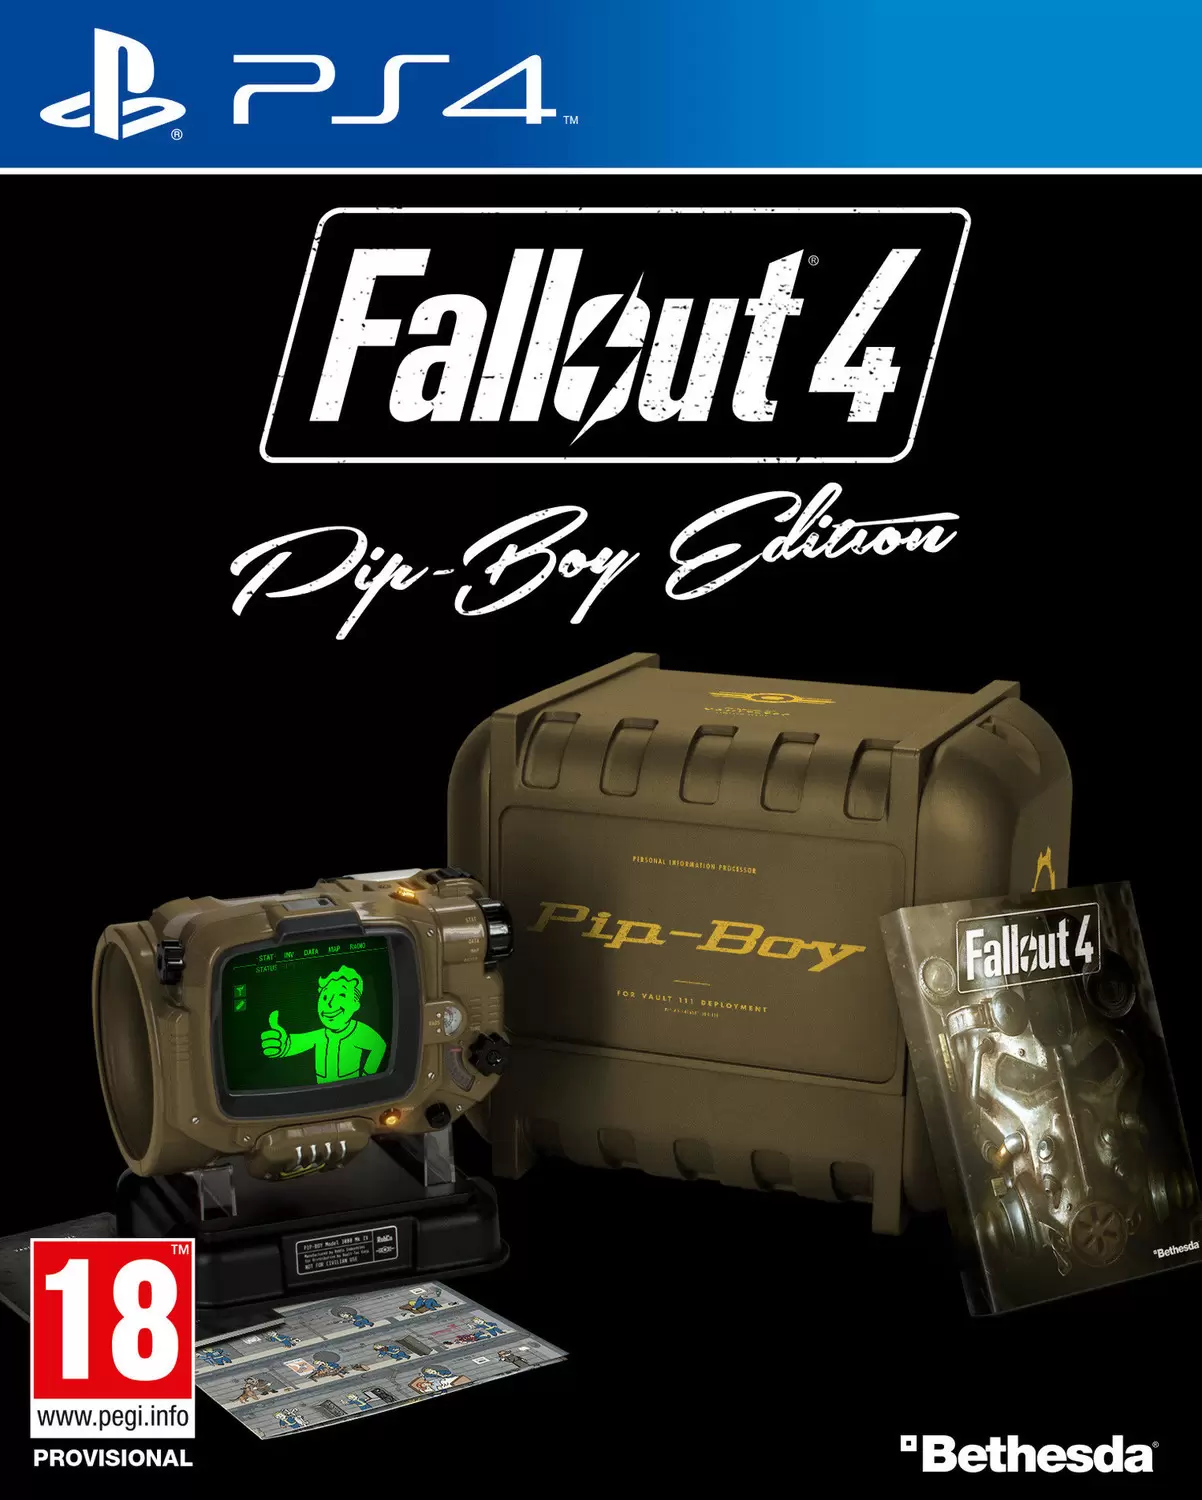 PS4 Games - Fallout 4: Pip-Boy Edition